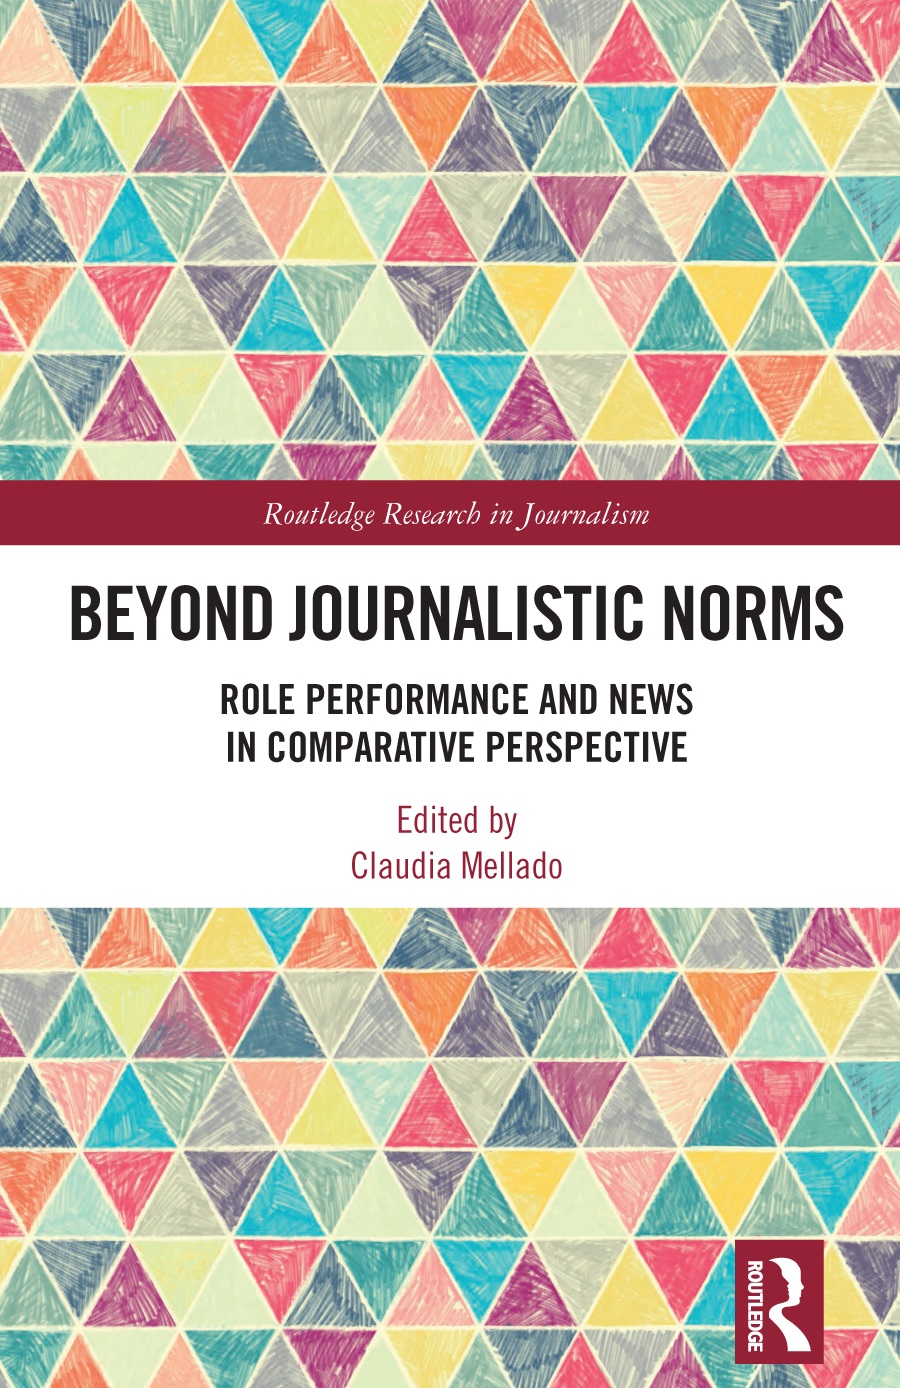 Beyond Journalistic Norms: Role Performance and News in Comparative Perspective